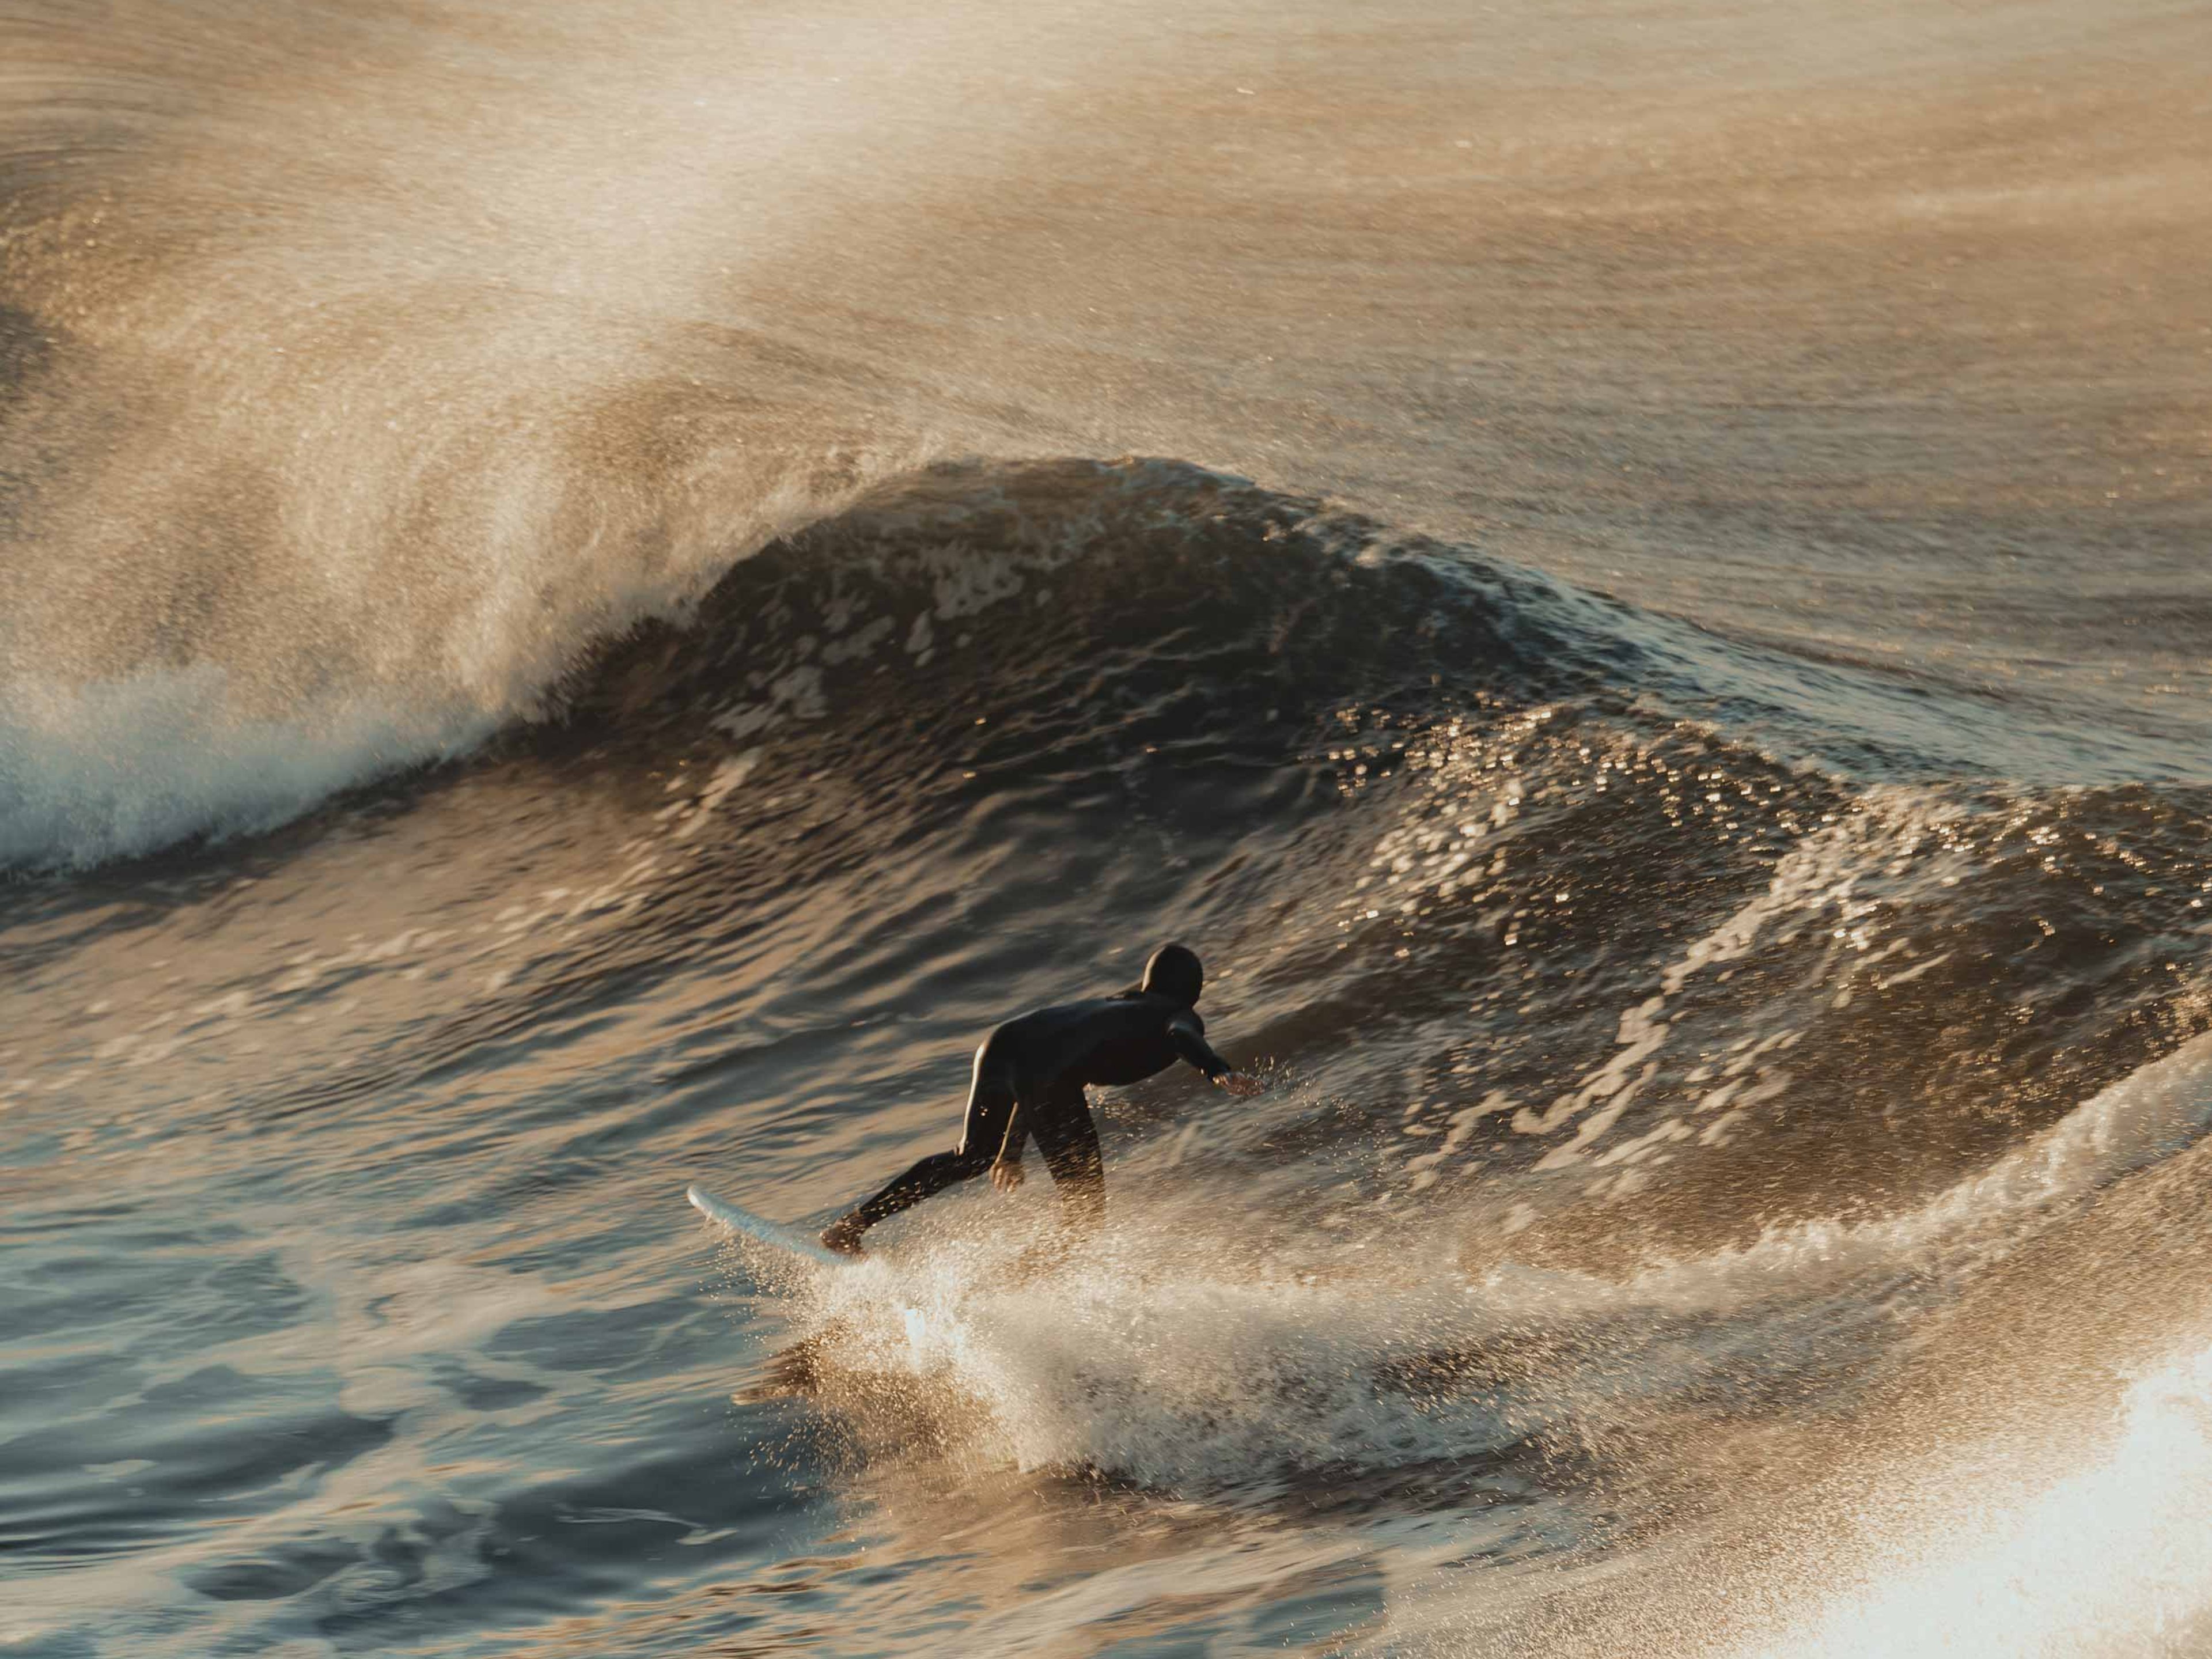 A surfer in the middle of a crashing wave at sunset.